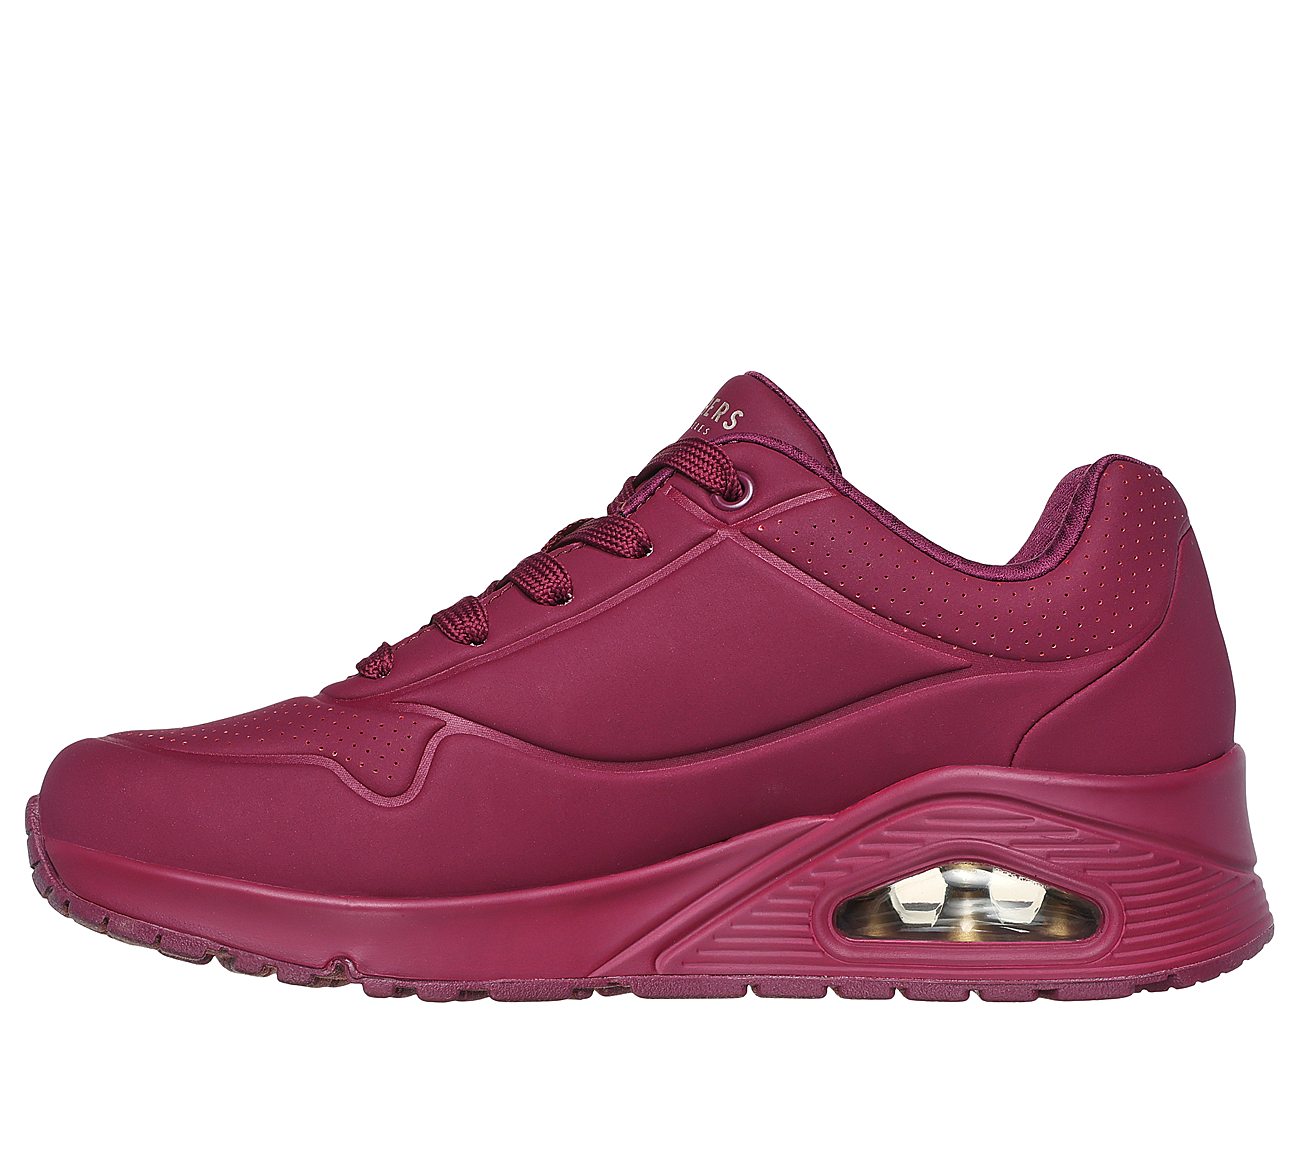 UNO - STAND ON AIR, PLUM Footwear Left View